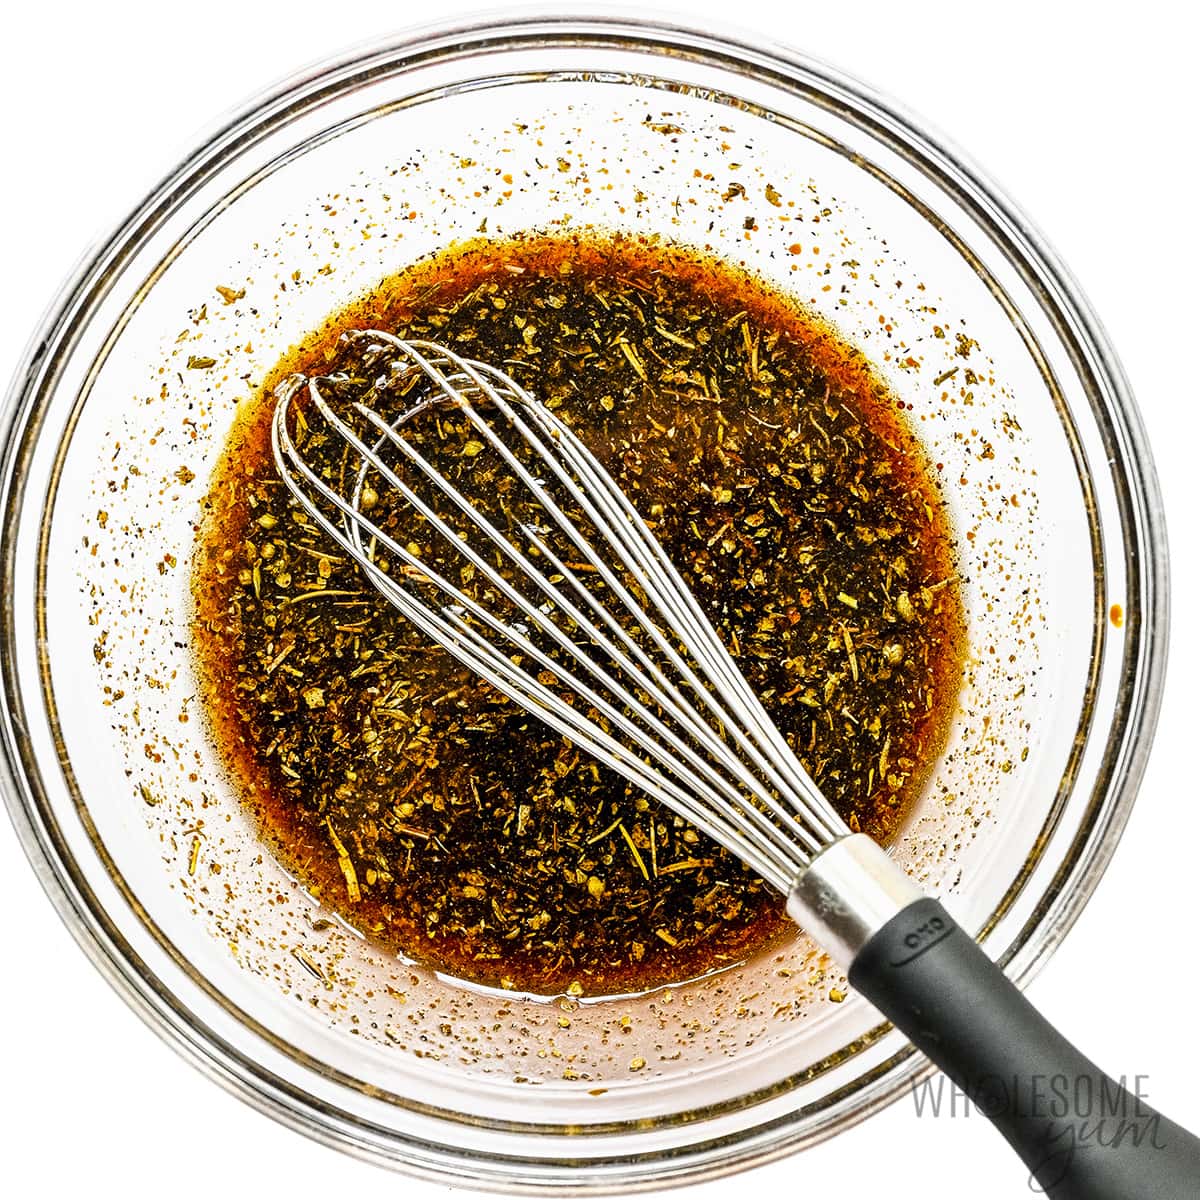 Marinade for steak whisked together in a bowl.